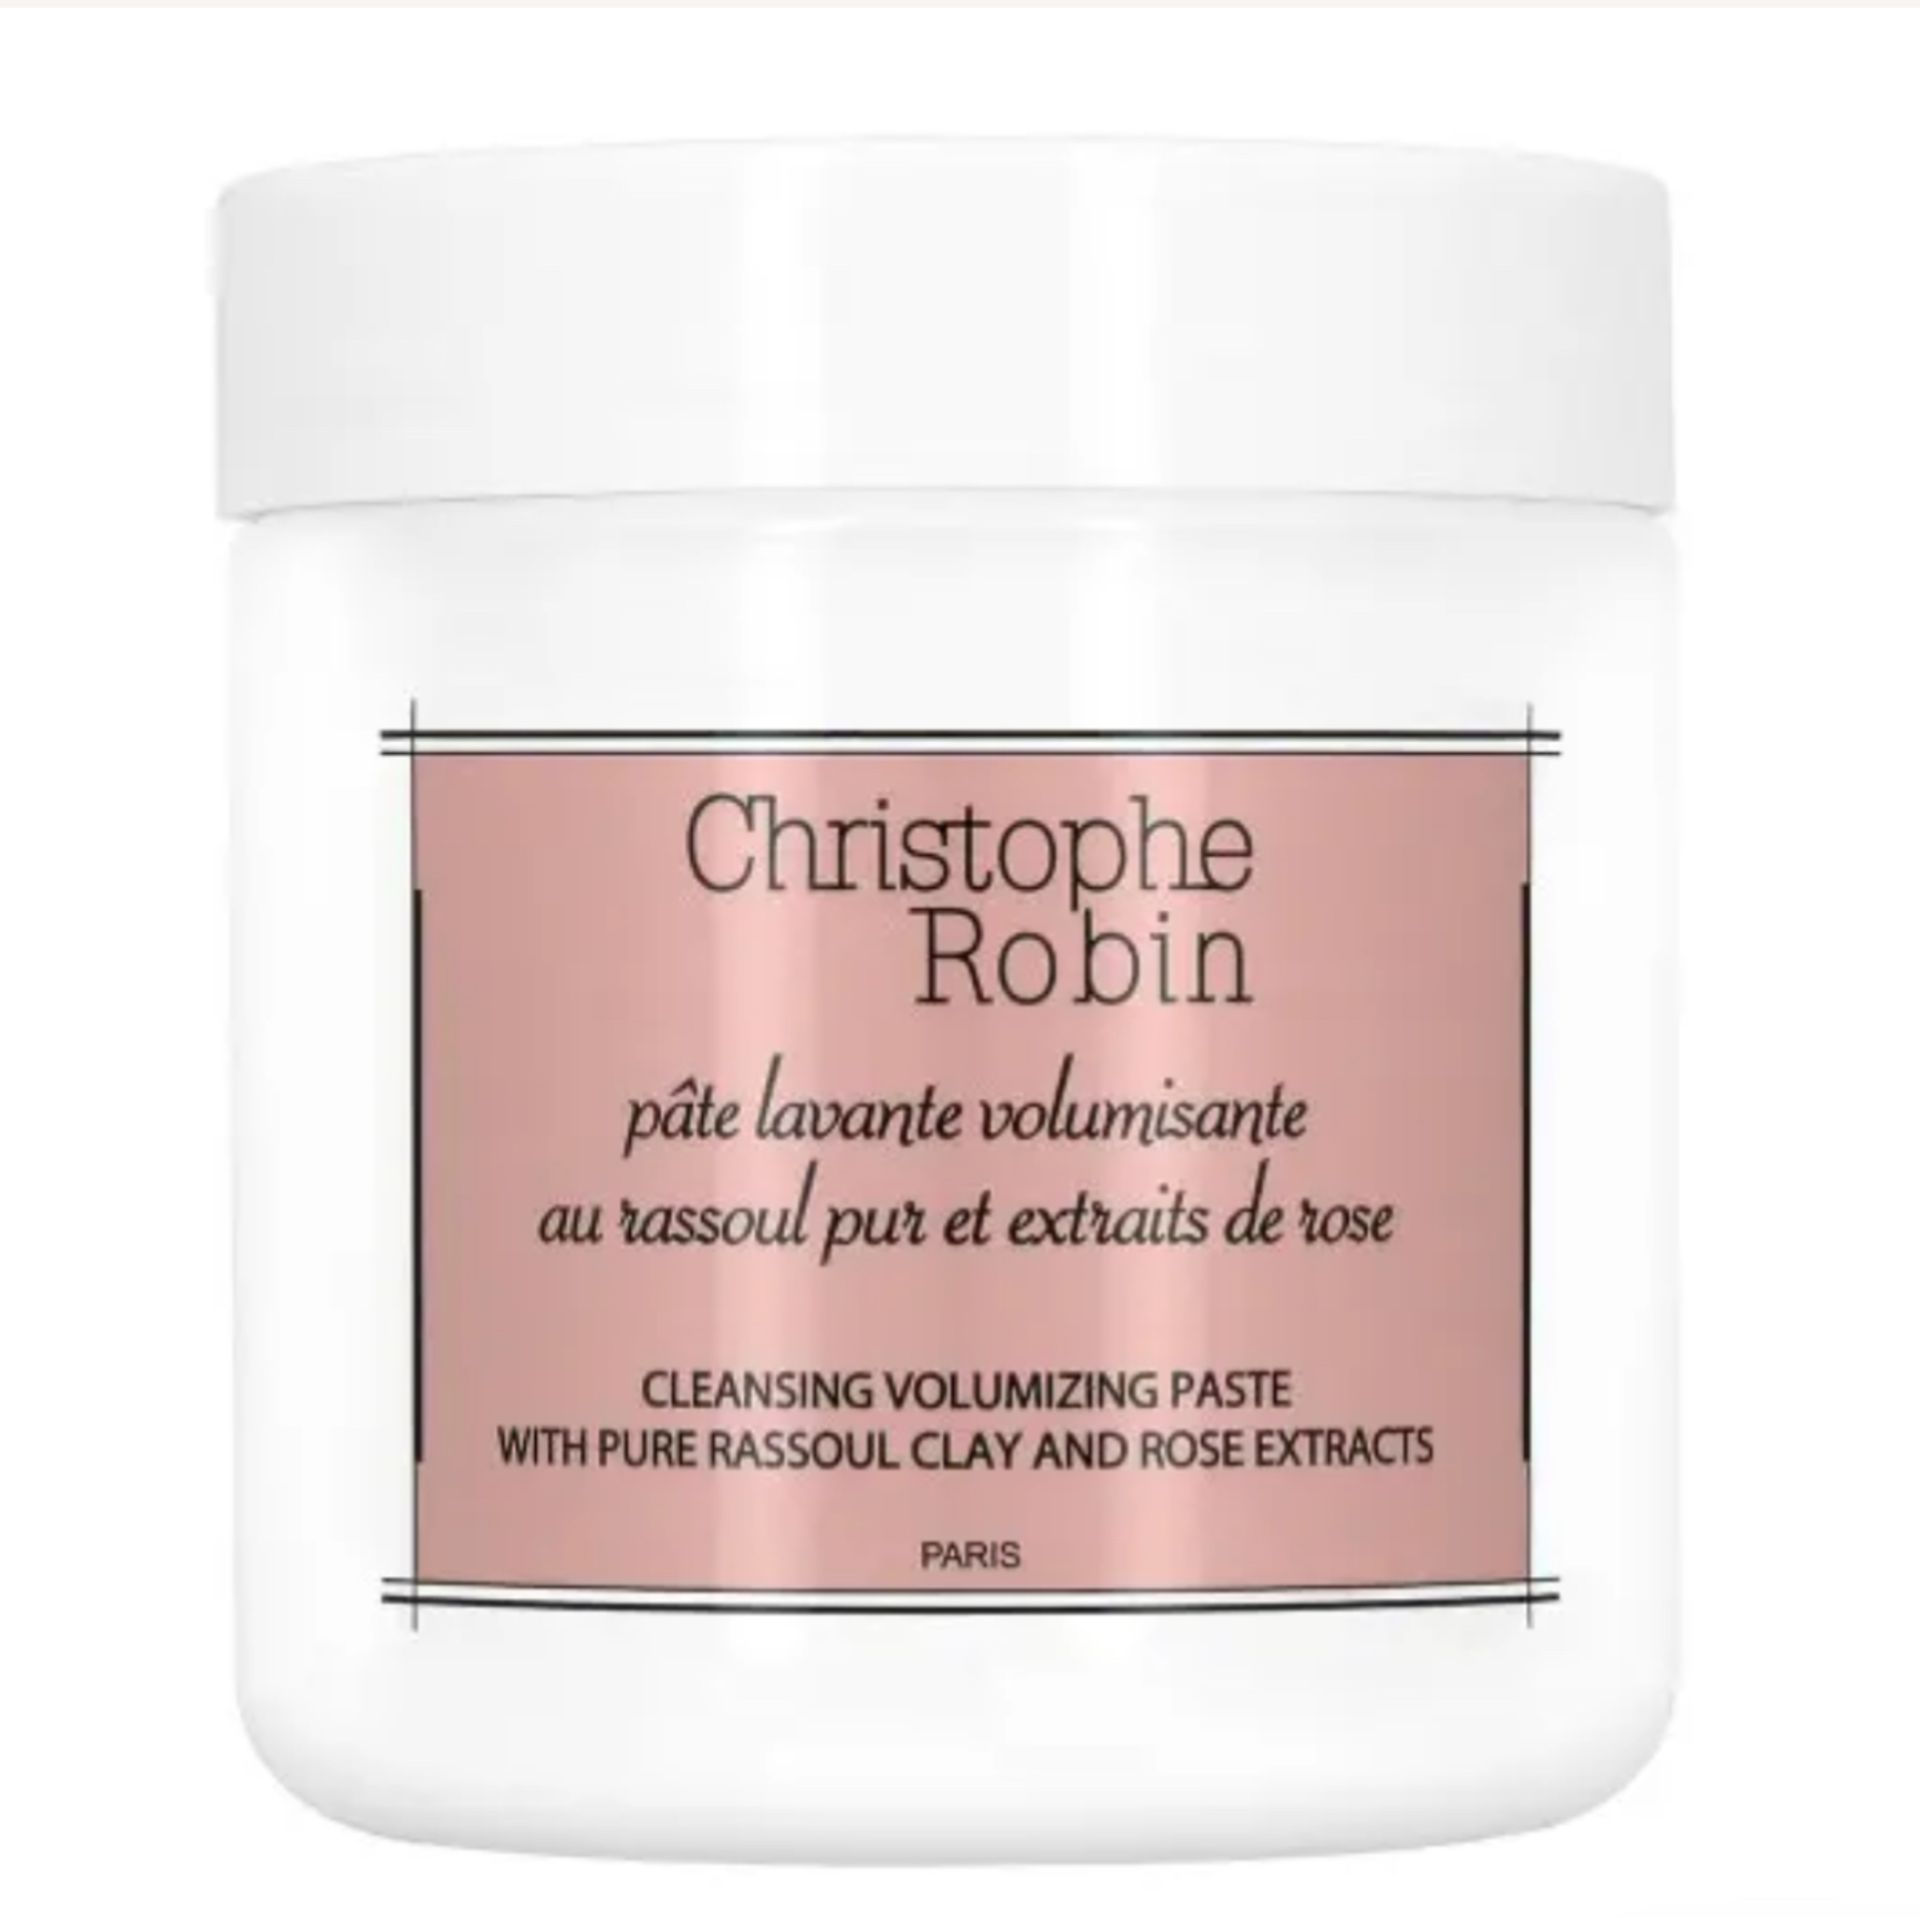 980 X CHRISTOPHE ROBIN CLEANSING VOLUMISING PASTE RASSOUL CLAY AND ROSE EXTRACTS 12ML RRP£2940 - Bild 2 aus 4